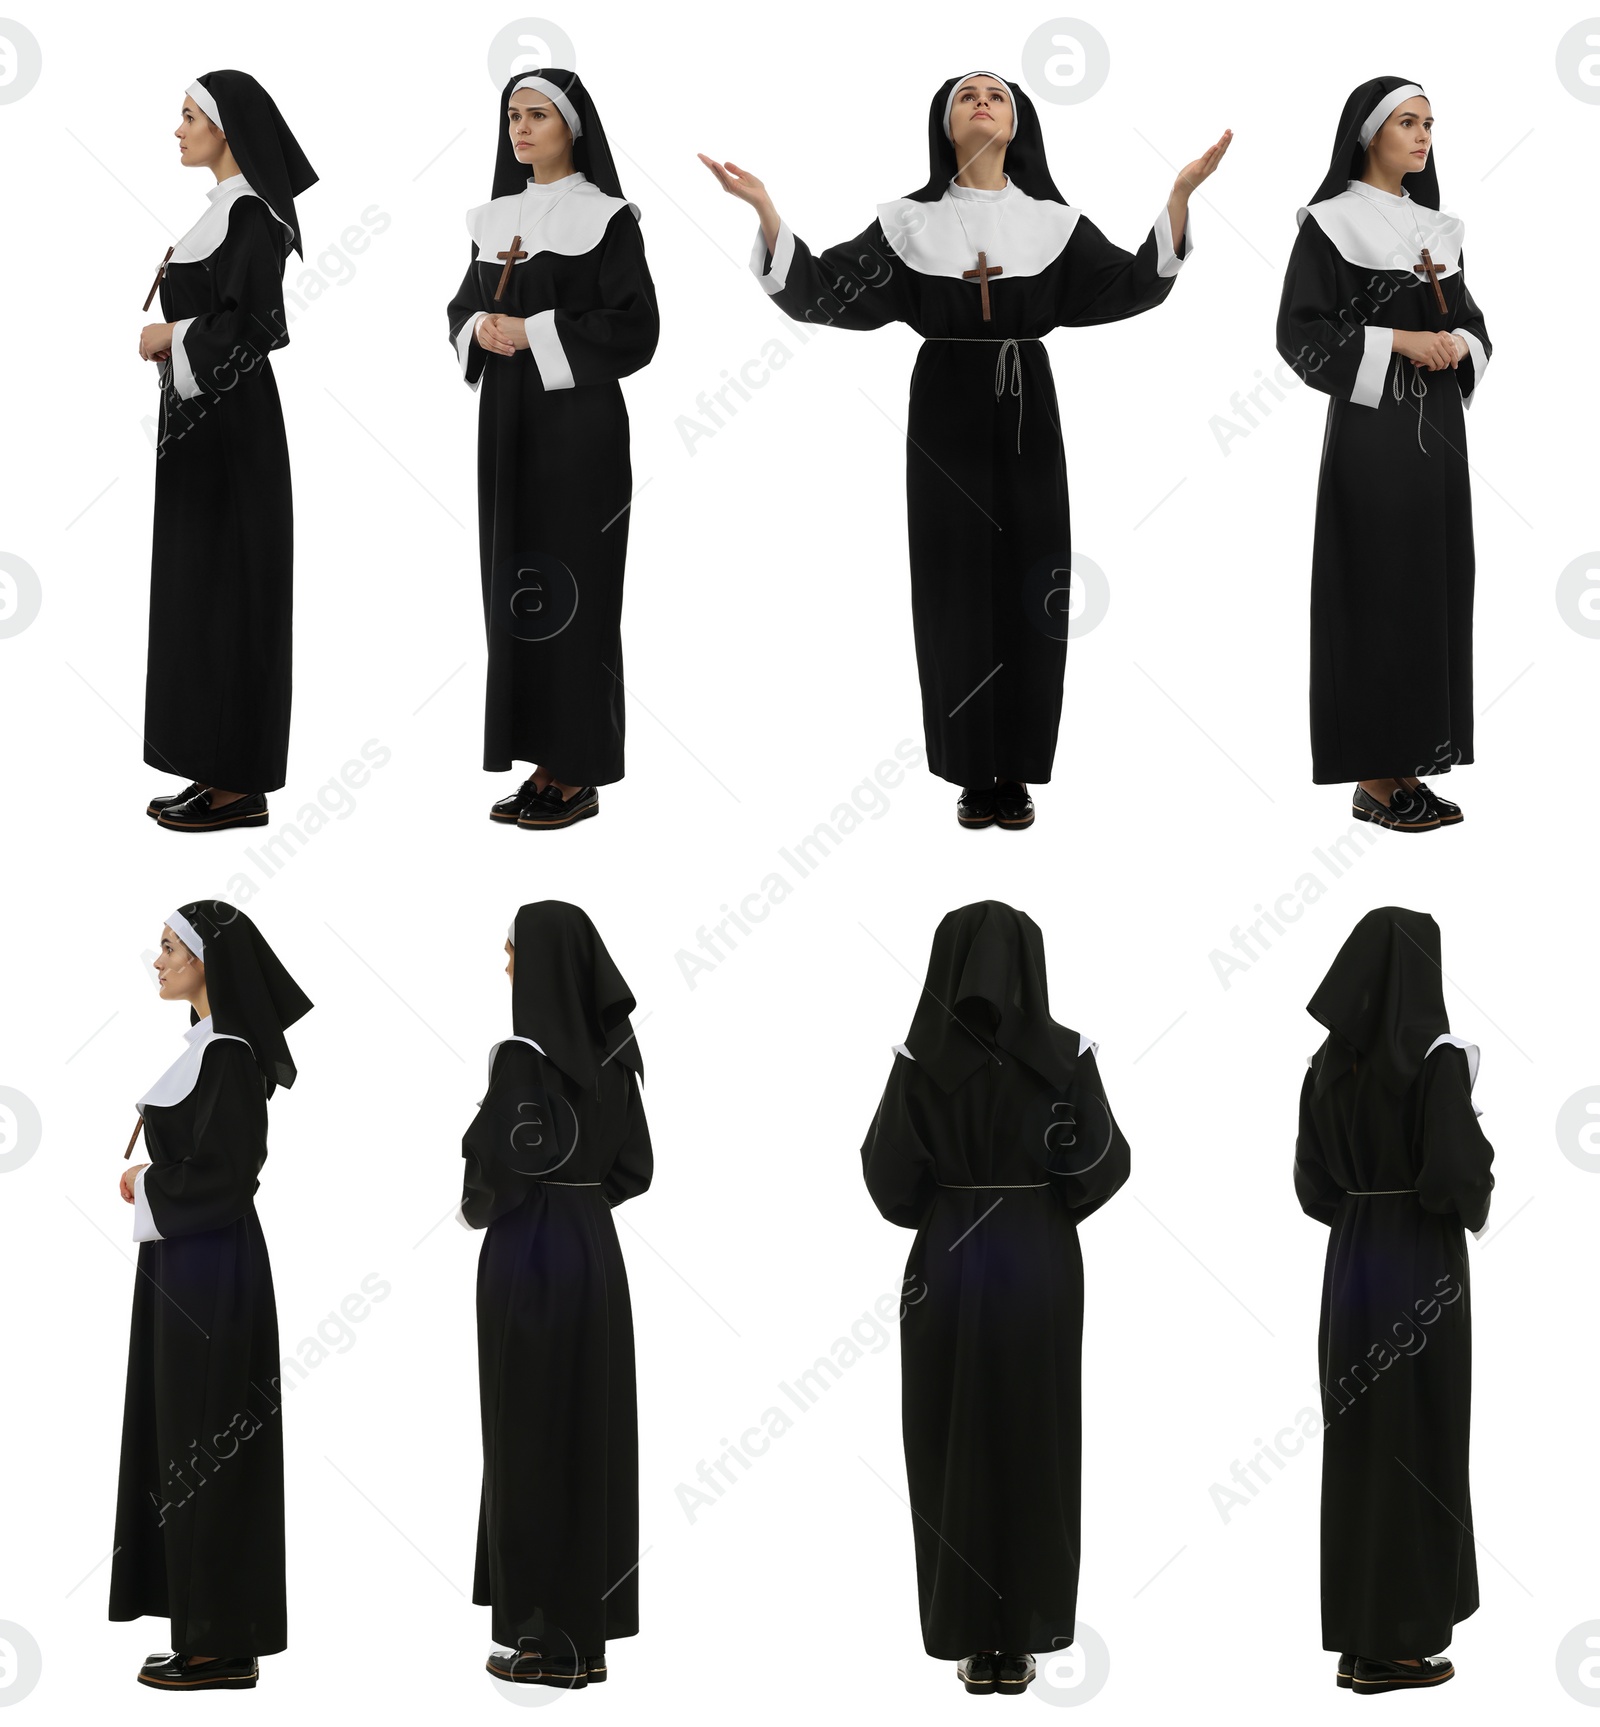 Image of Collage with photos of young nun on white background